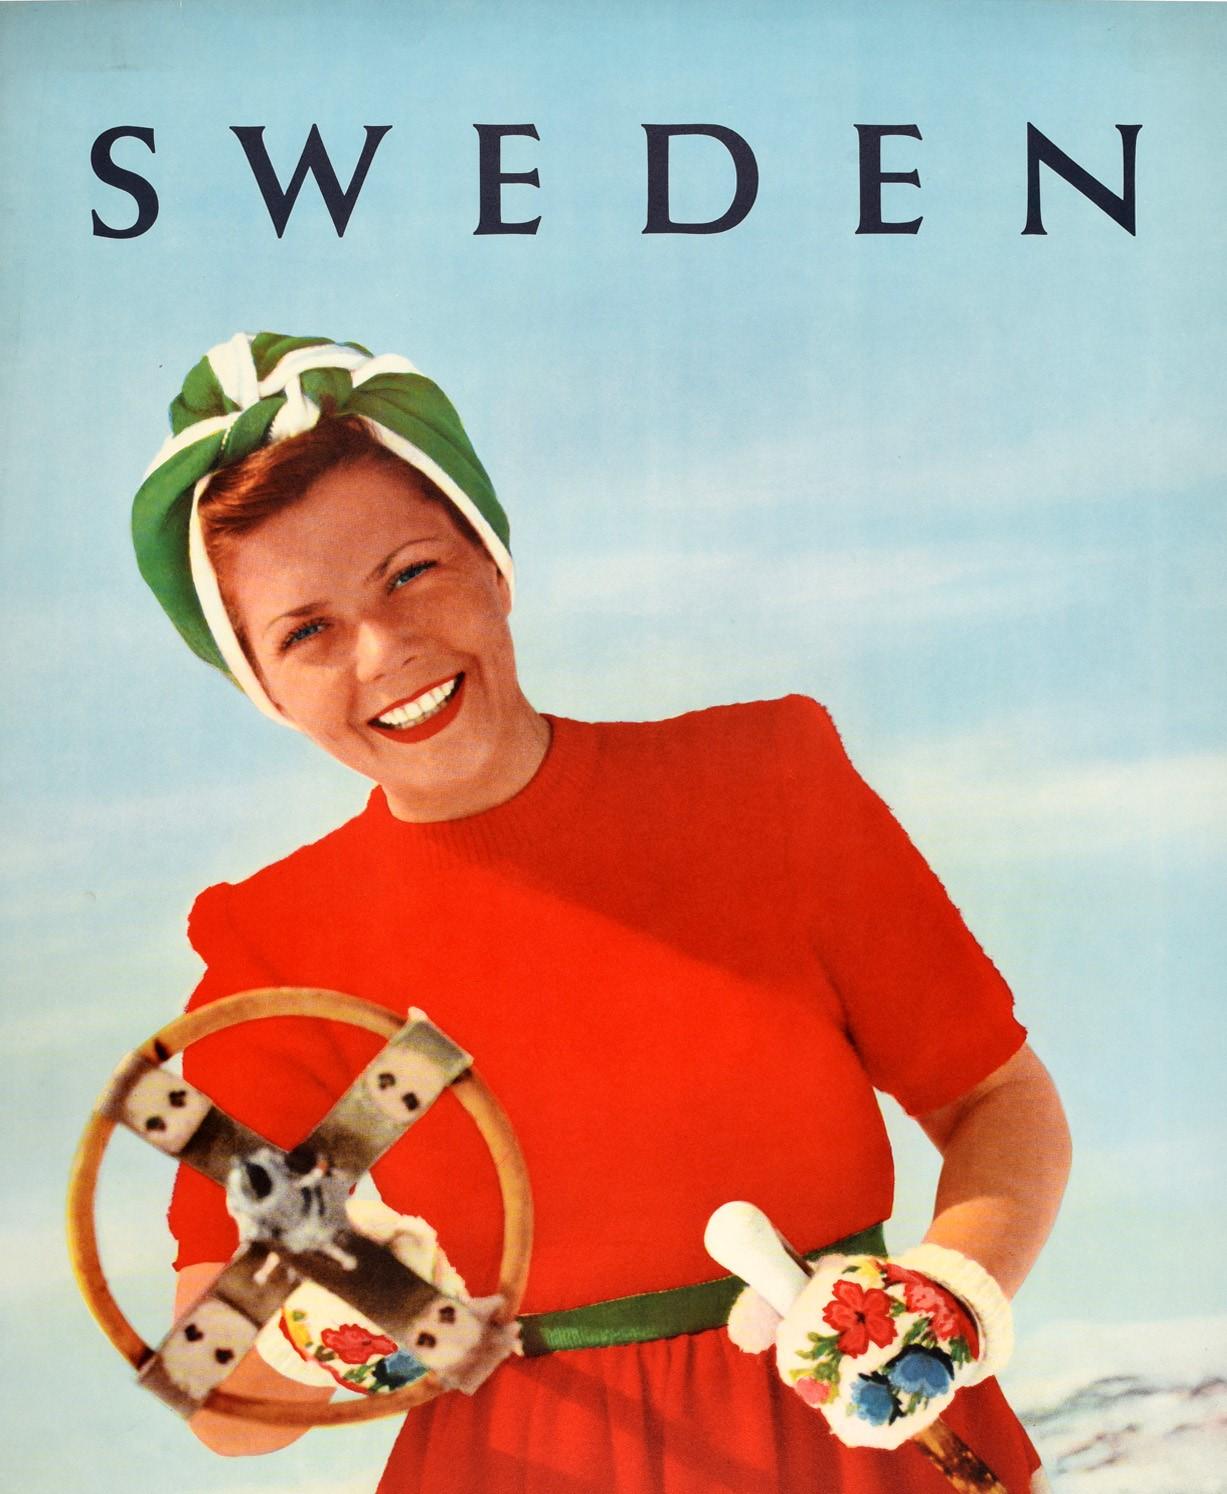 Original vintage ski travel poster for Sweden featuring a fun image of a smiling lady wearing a bright red, white and green dress with a head scarf and floral patterned gloves standing on a snowy mountain and pointing a wooden ski pole at the